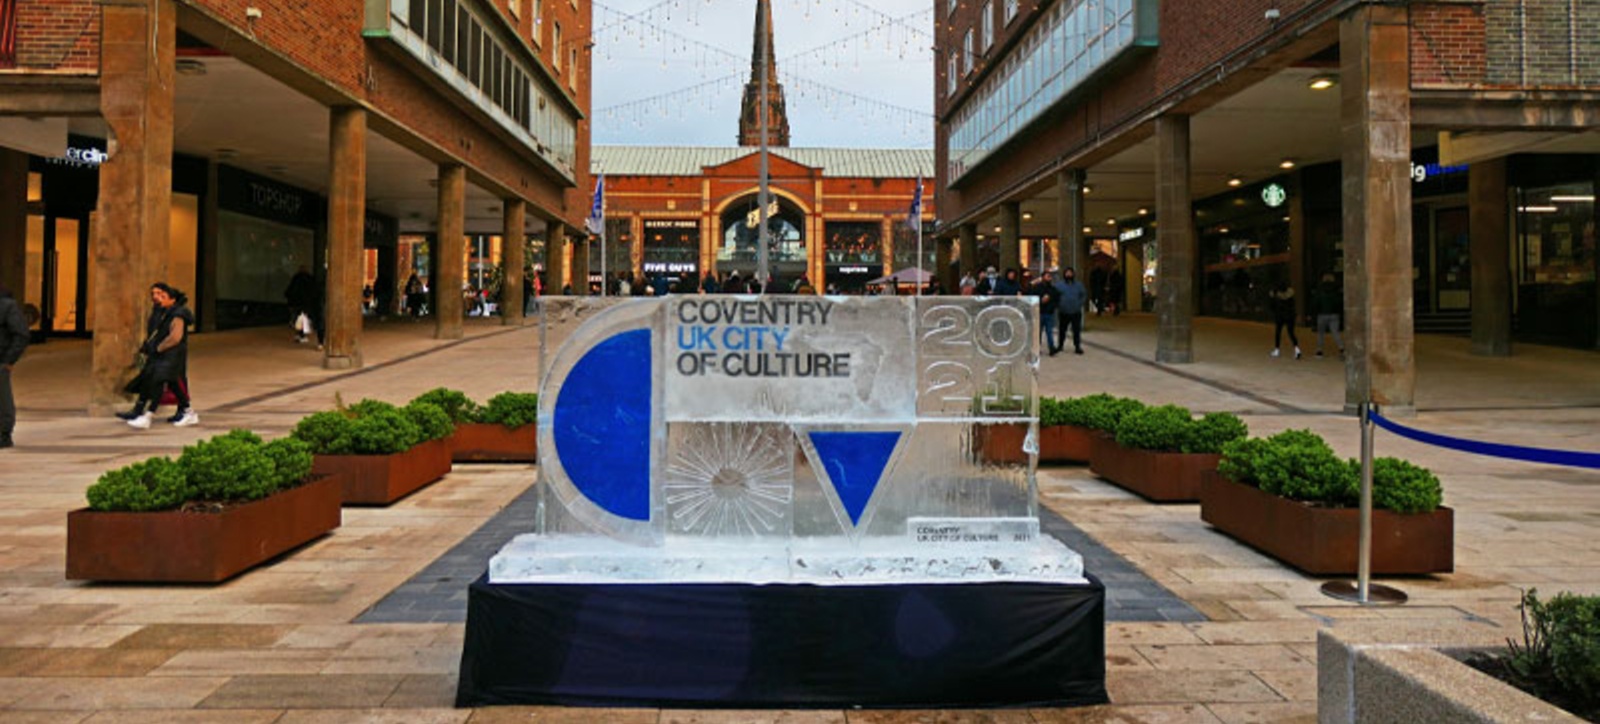 A picture of the Coventry City of Culture logo in the Coventry city centre shopping precinct